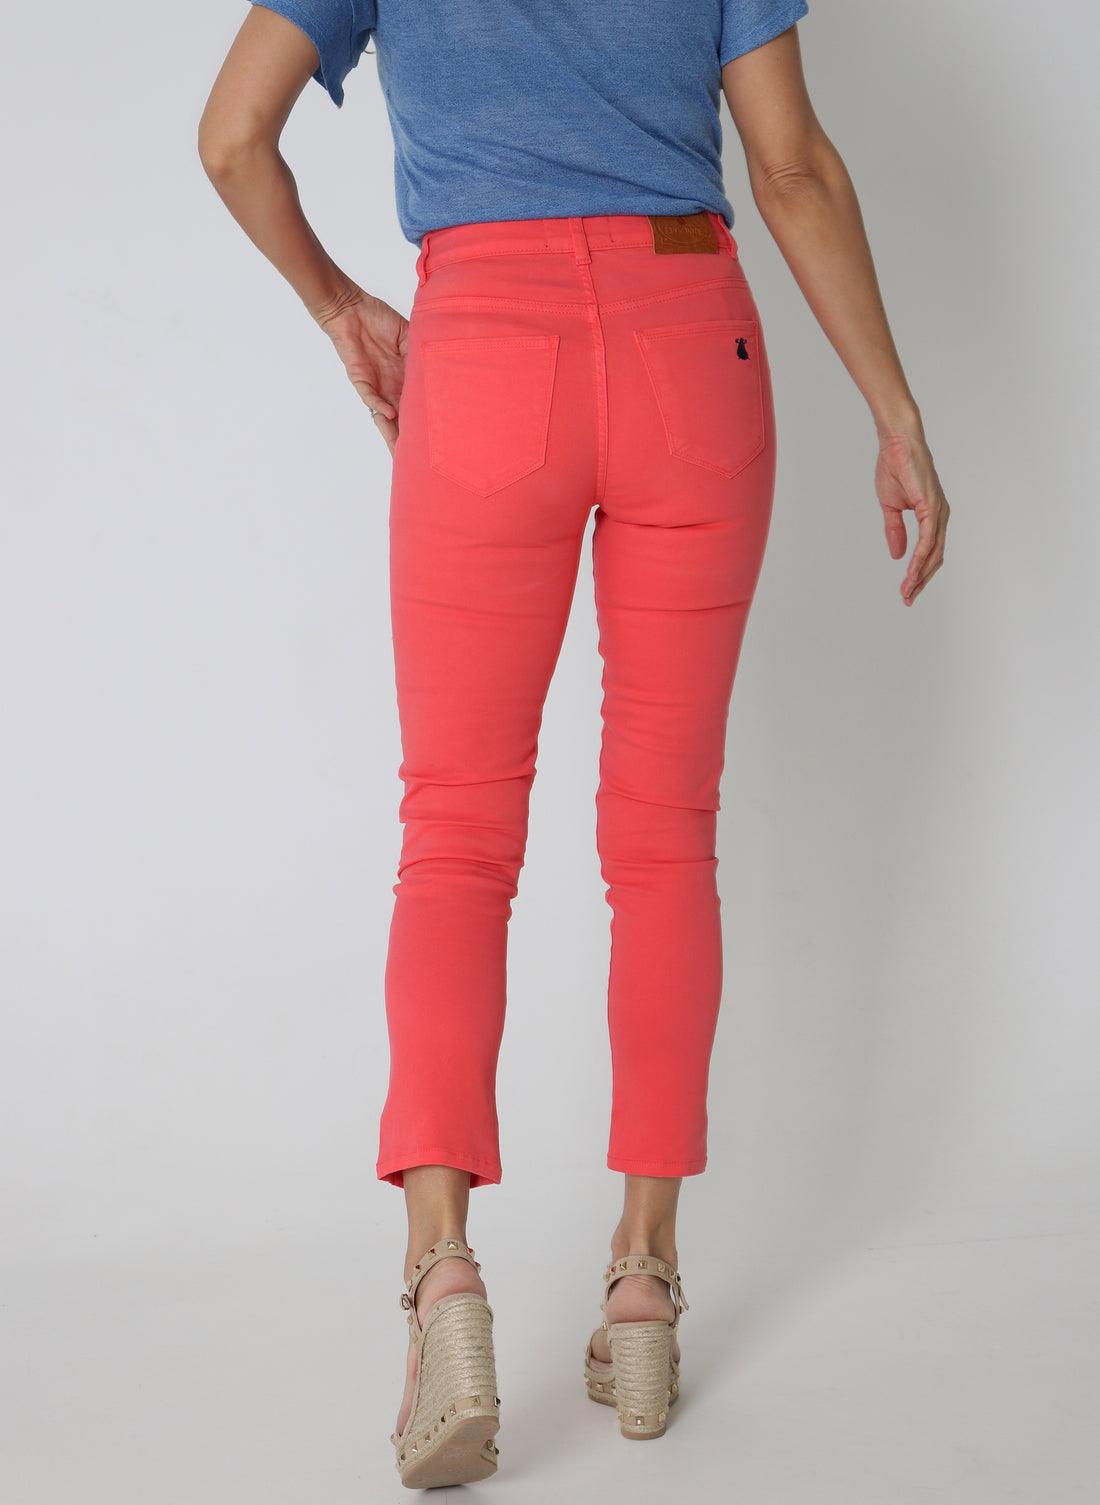 Coral Twill Pants Buttons Woman